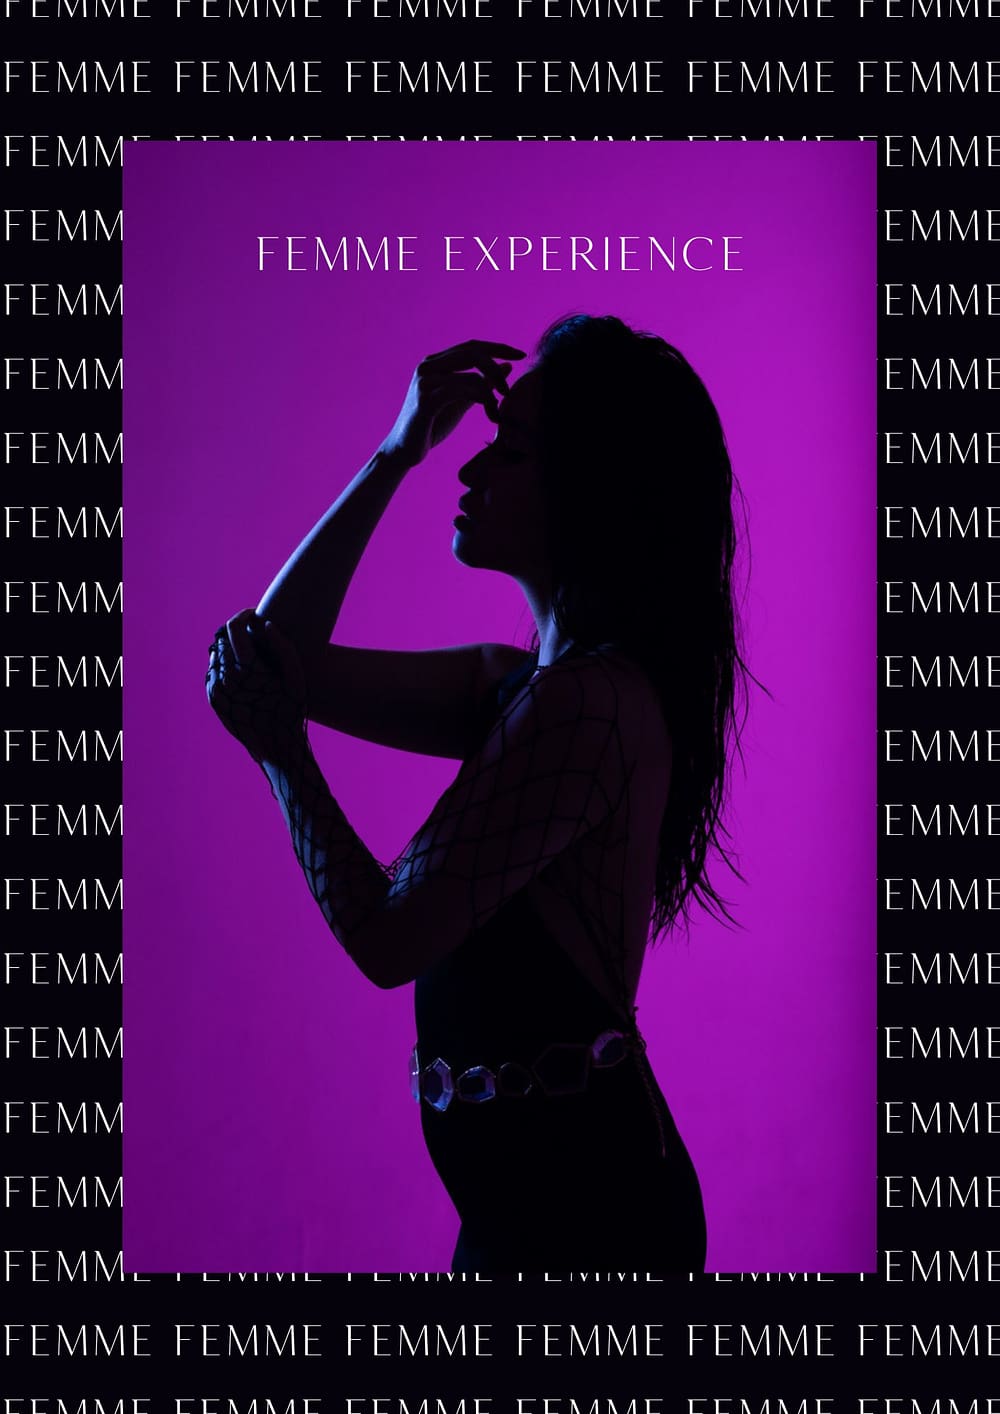 Femme Experience